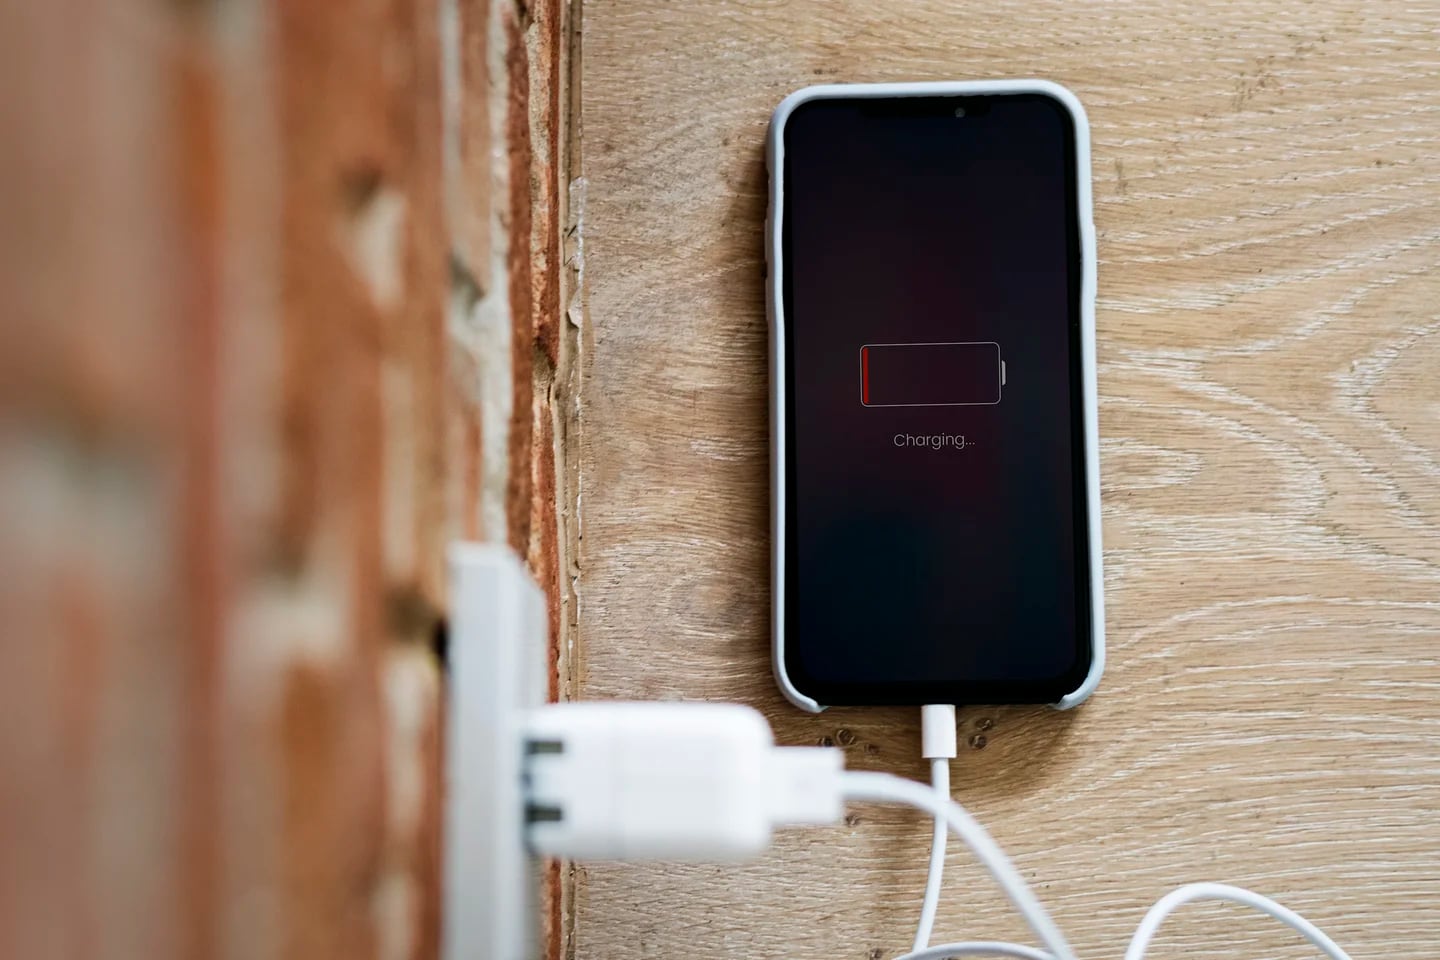 What Is The Best Way To Charge The Cell Phone And Prevent Battery Damage